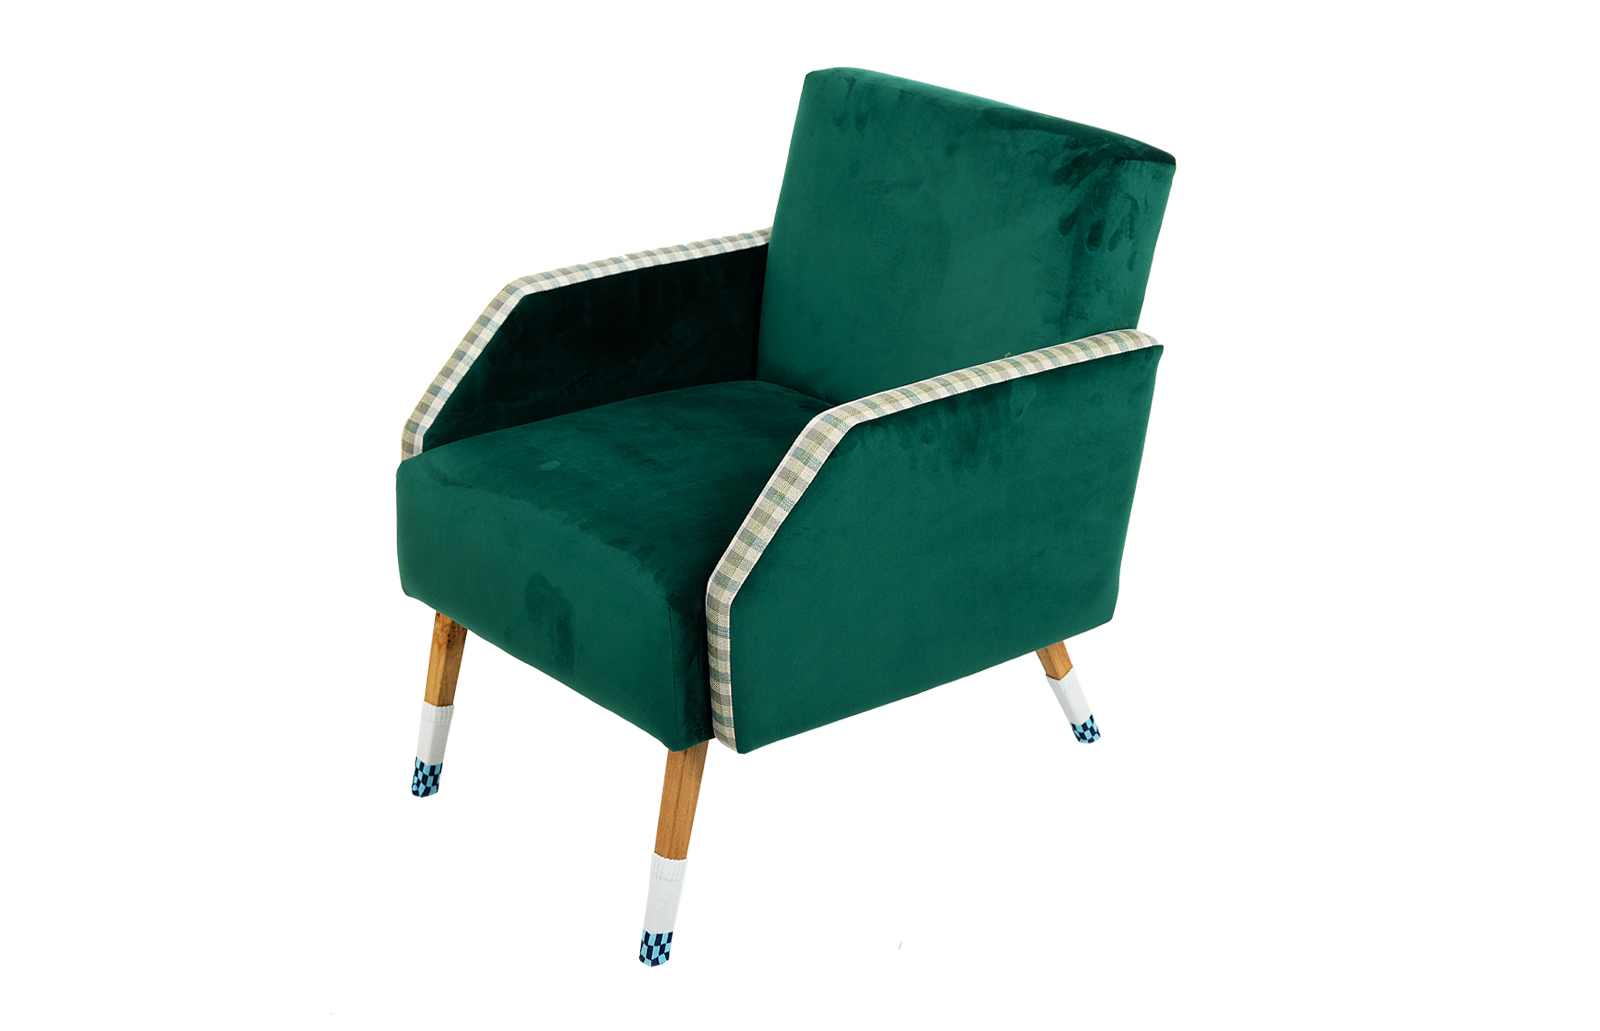 armchair after renovation